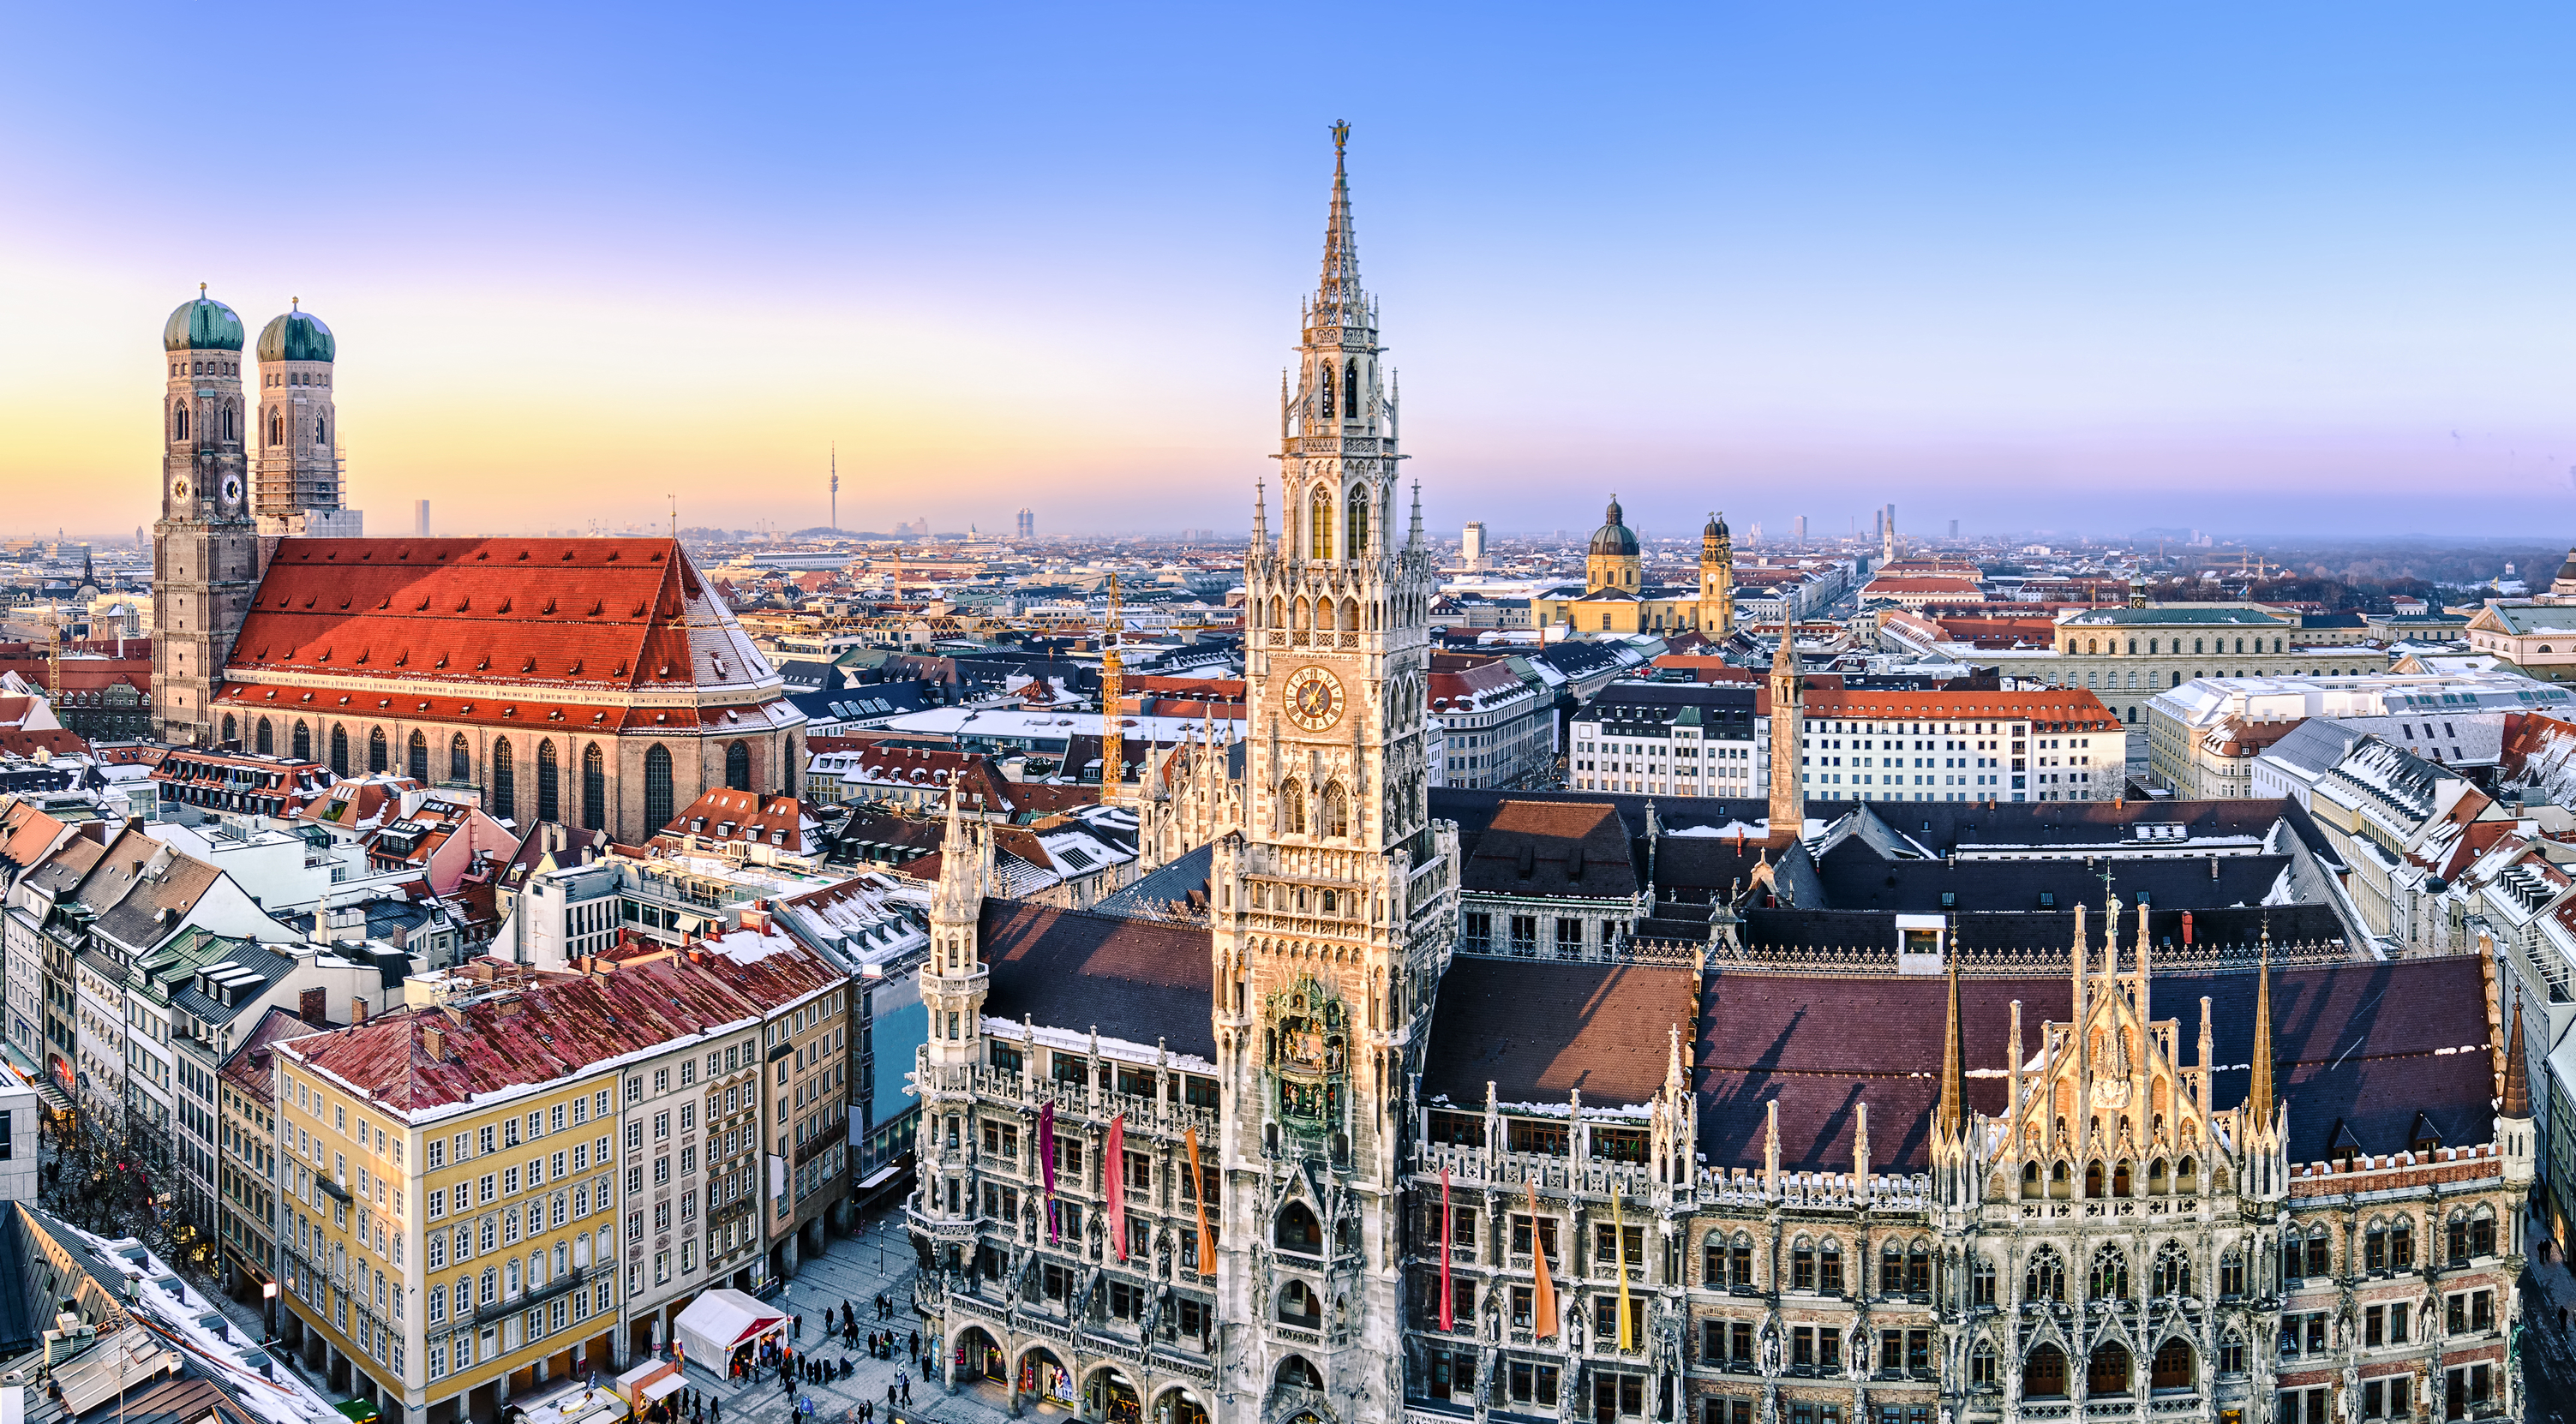 8-night Switzerland, Germany & Austria escape with flights and hotels from $1,354